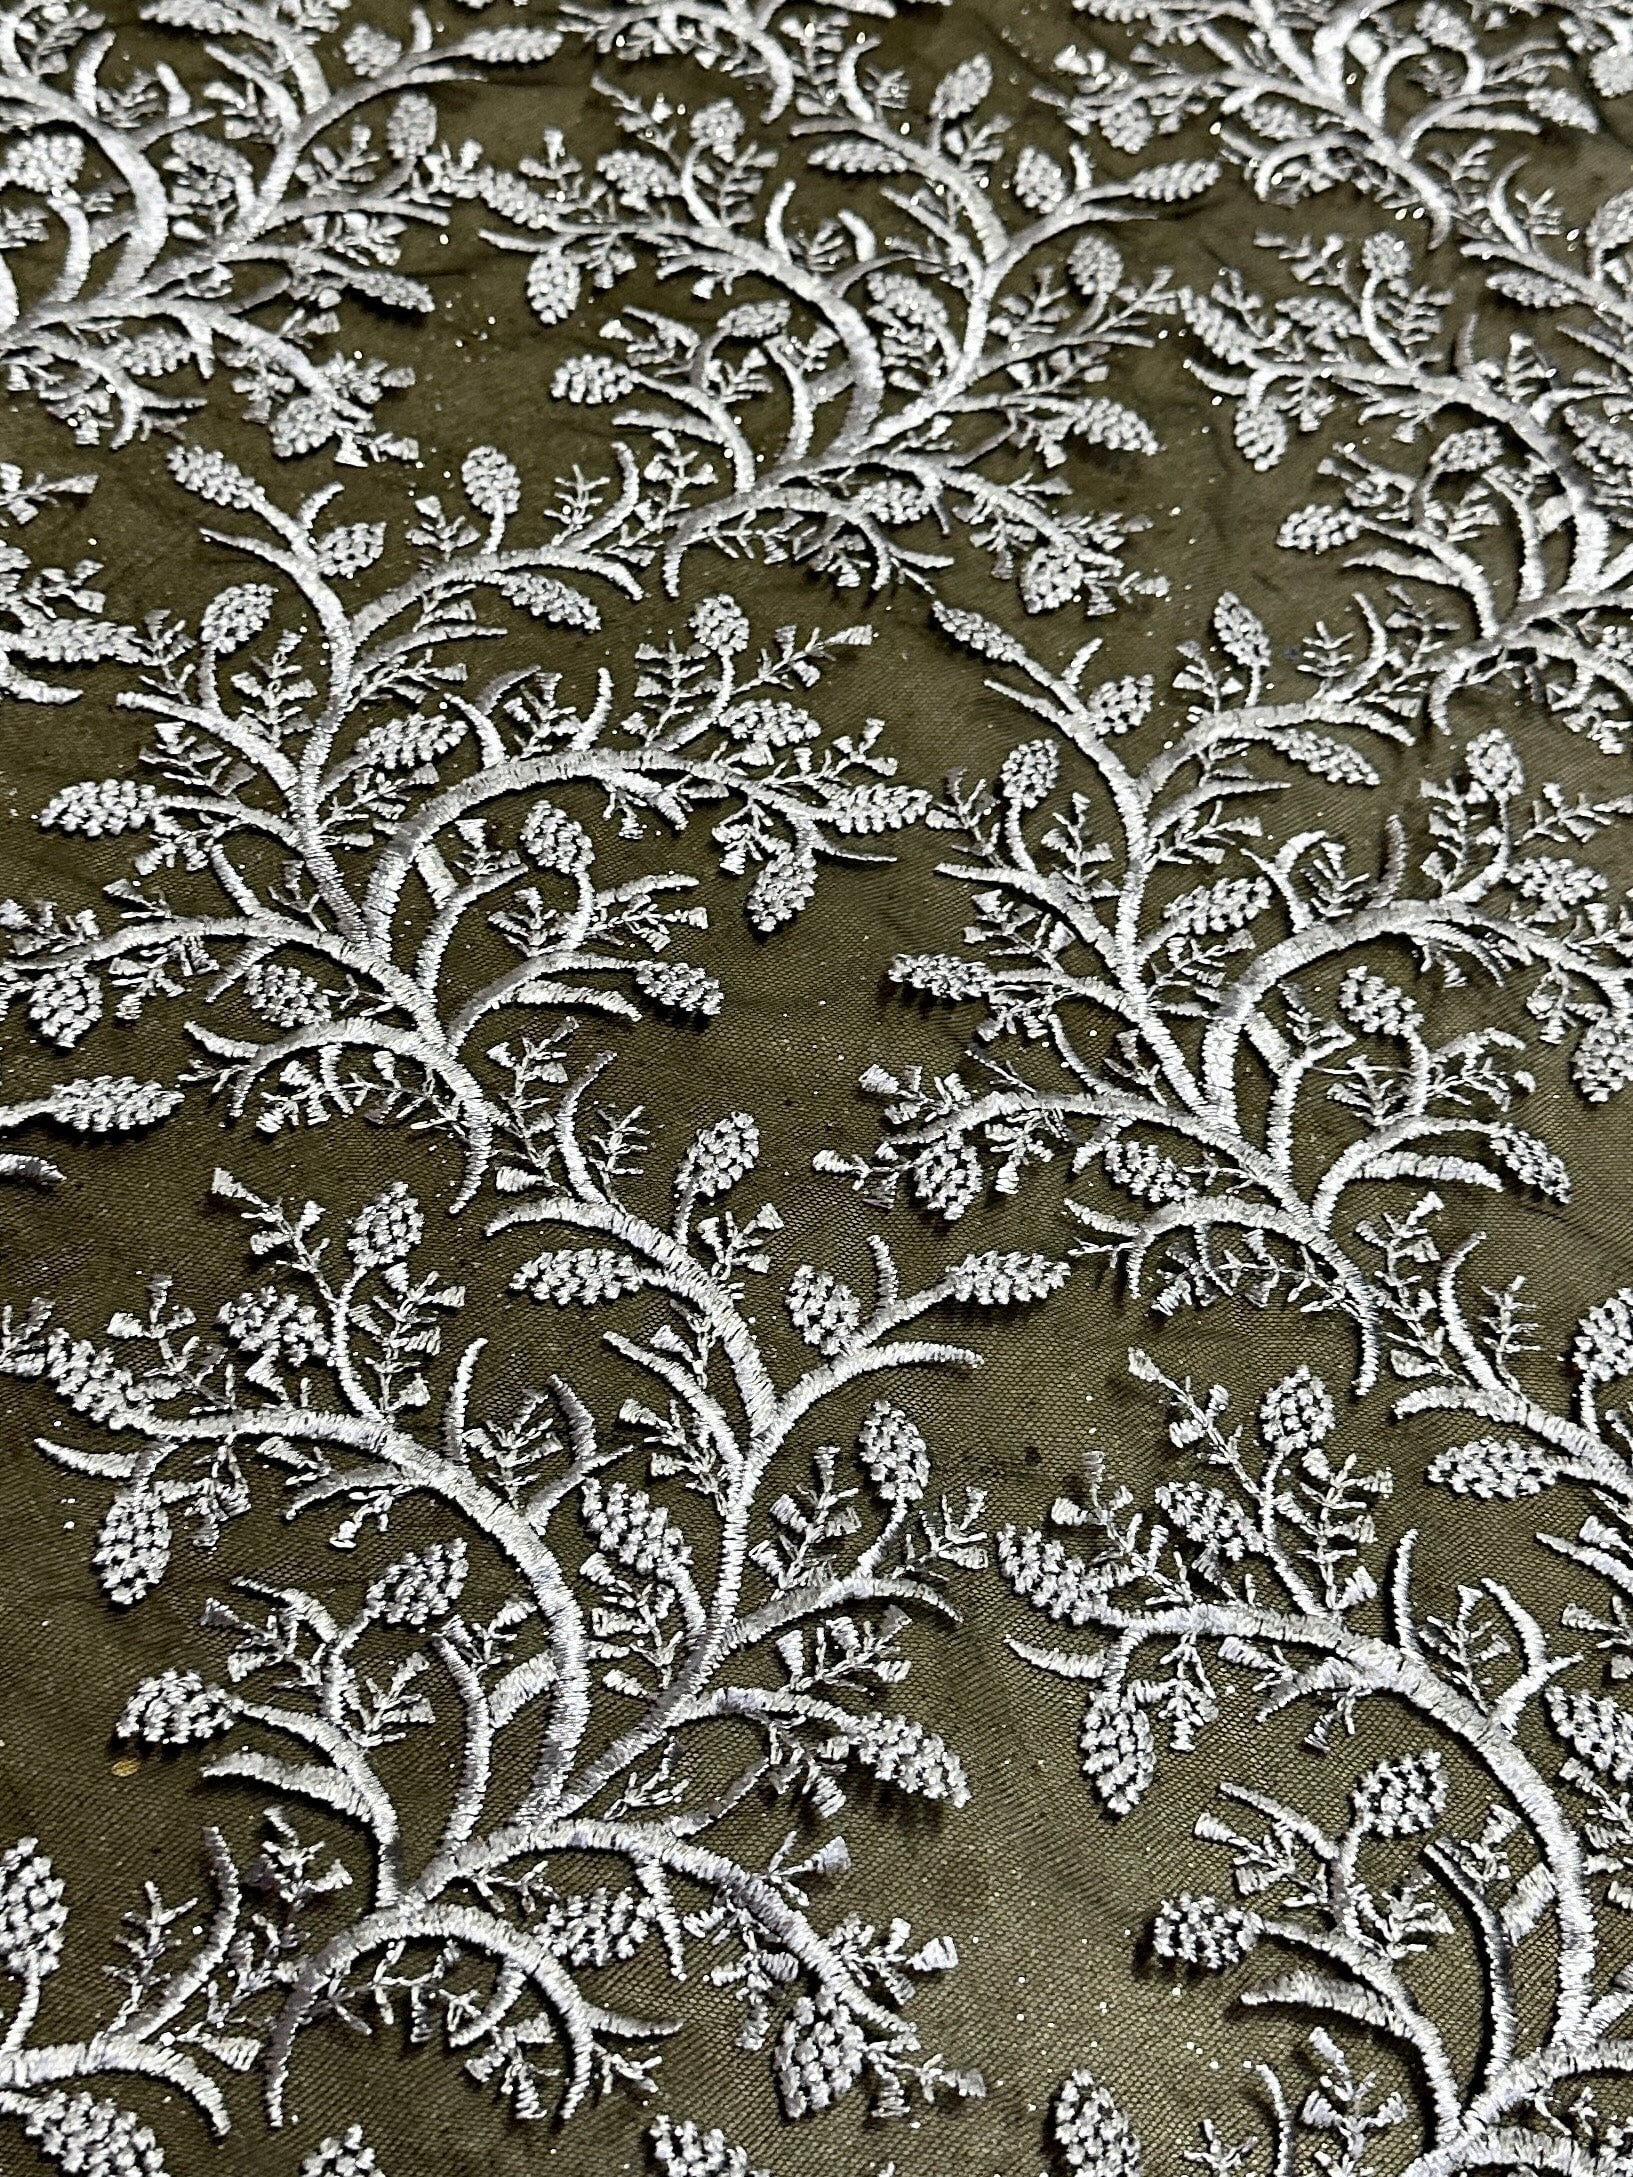 Silver Leaf Branch Embroidered Lace, dark silver Leaf Branch Embroidered Lace, light silver Leaf Branch Embroidered Lace, Leaf Branch Embroidered Lace for woman, Leaf Branch Embroidered Lace for bride, Leaf Branch Embroidered Lace in low price, Leaf Branch Embroidered Lace on sale, premium Leaf Branch Embroidered Lace